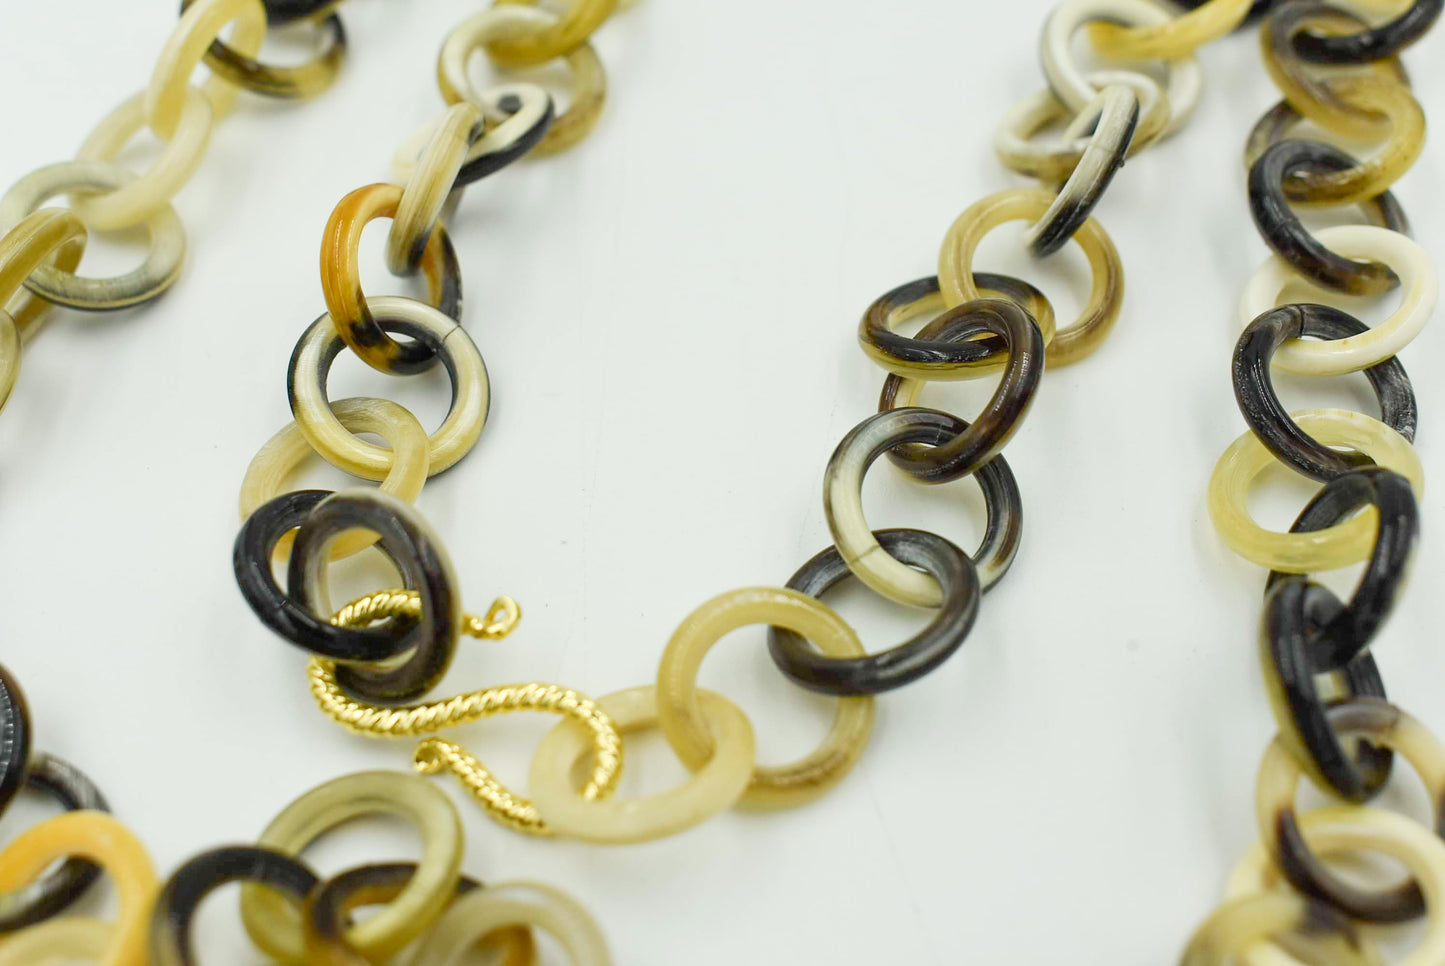 Horn Chain Necklace